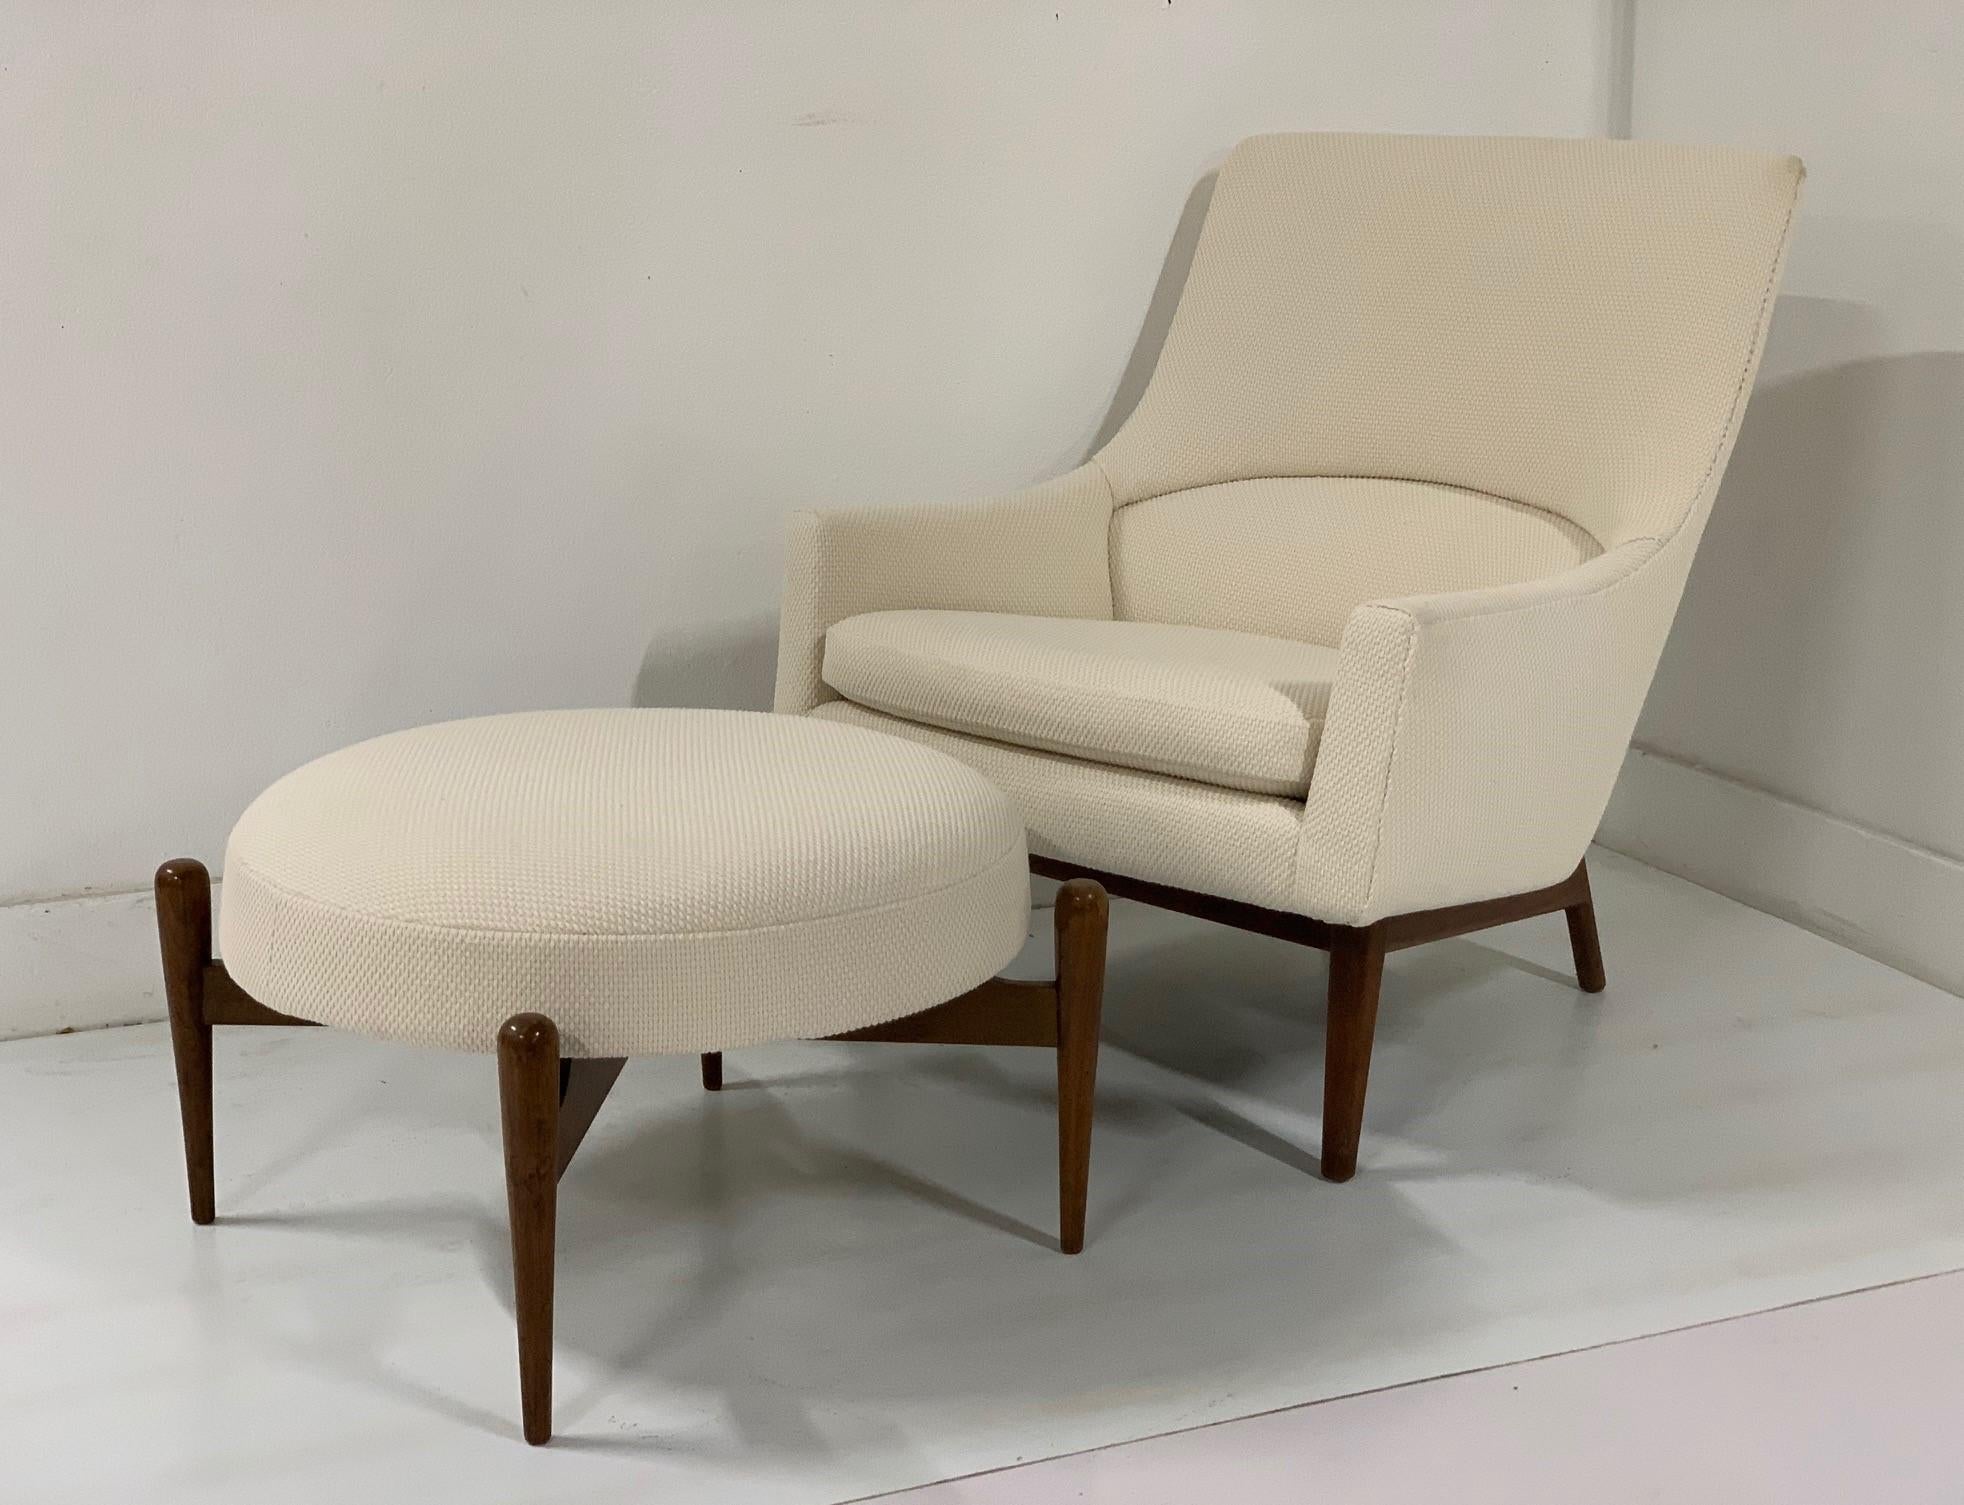 Jens Risom lounge A-Chair with a rare matching ottoman. Sculptural solid walnut frame and newly upholstered. Mid Century Modern.

Originally designed by Jens Risom in 1961 the A-Chair is a graceful expression of an elegant, upholstered chair in a